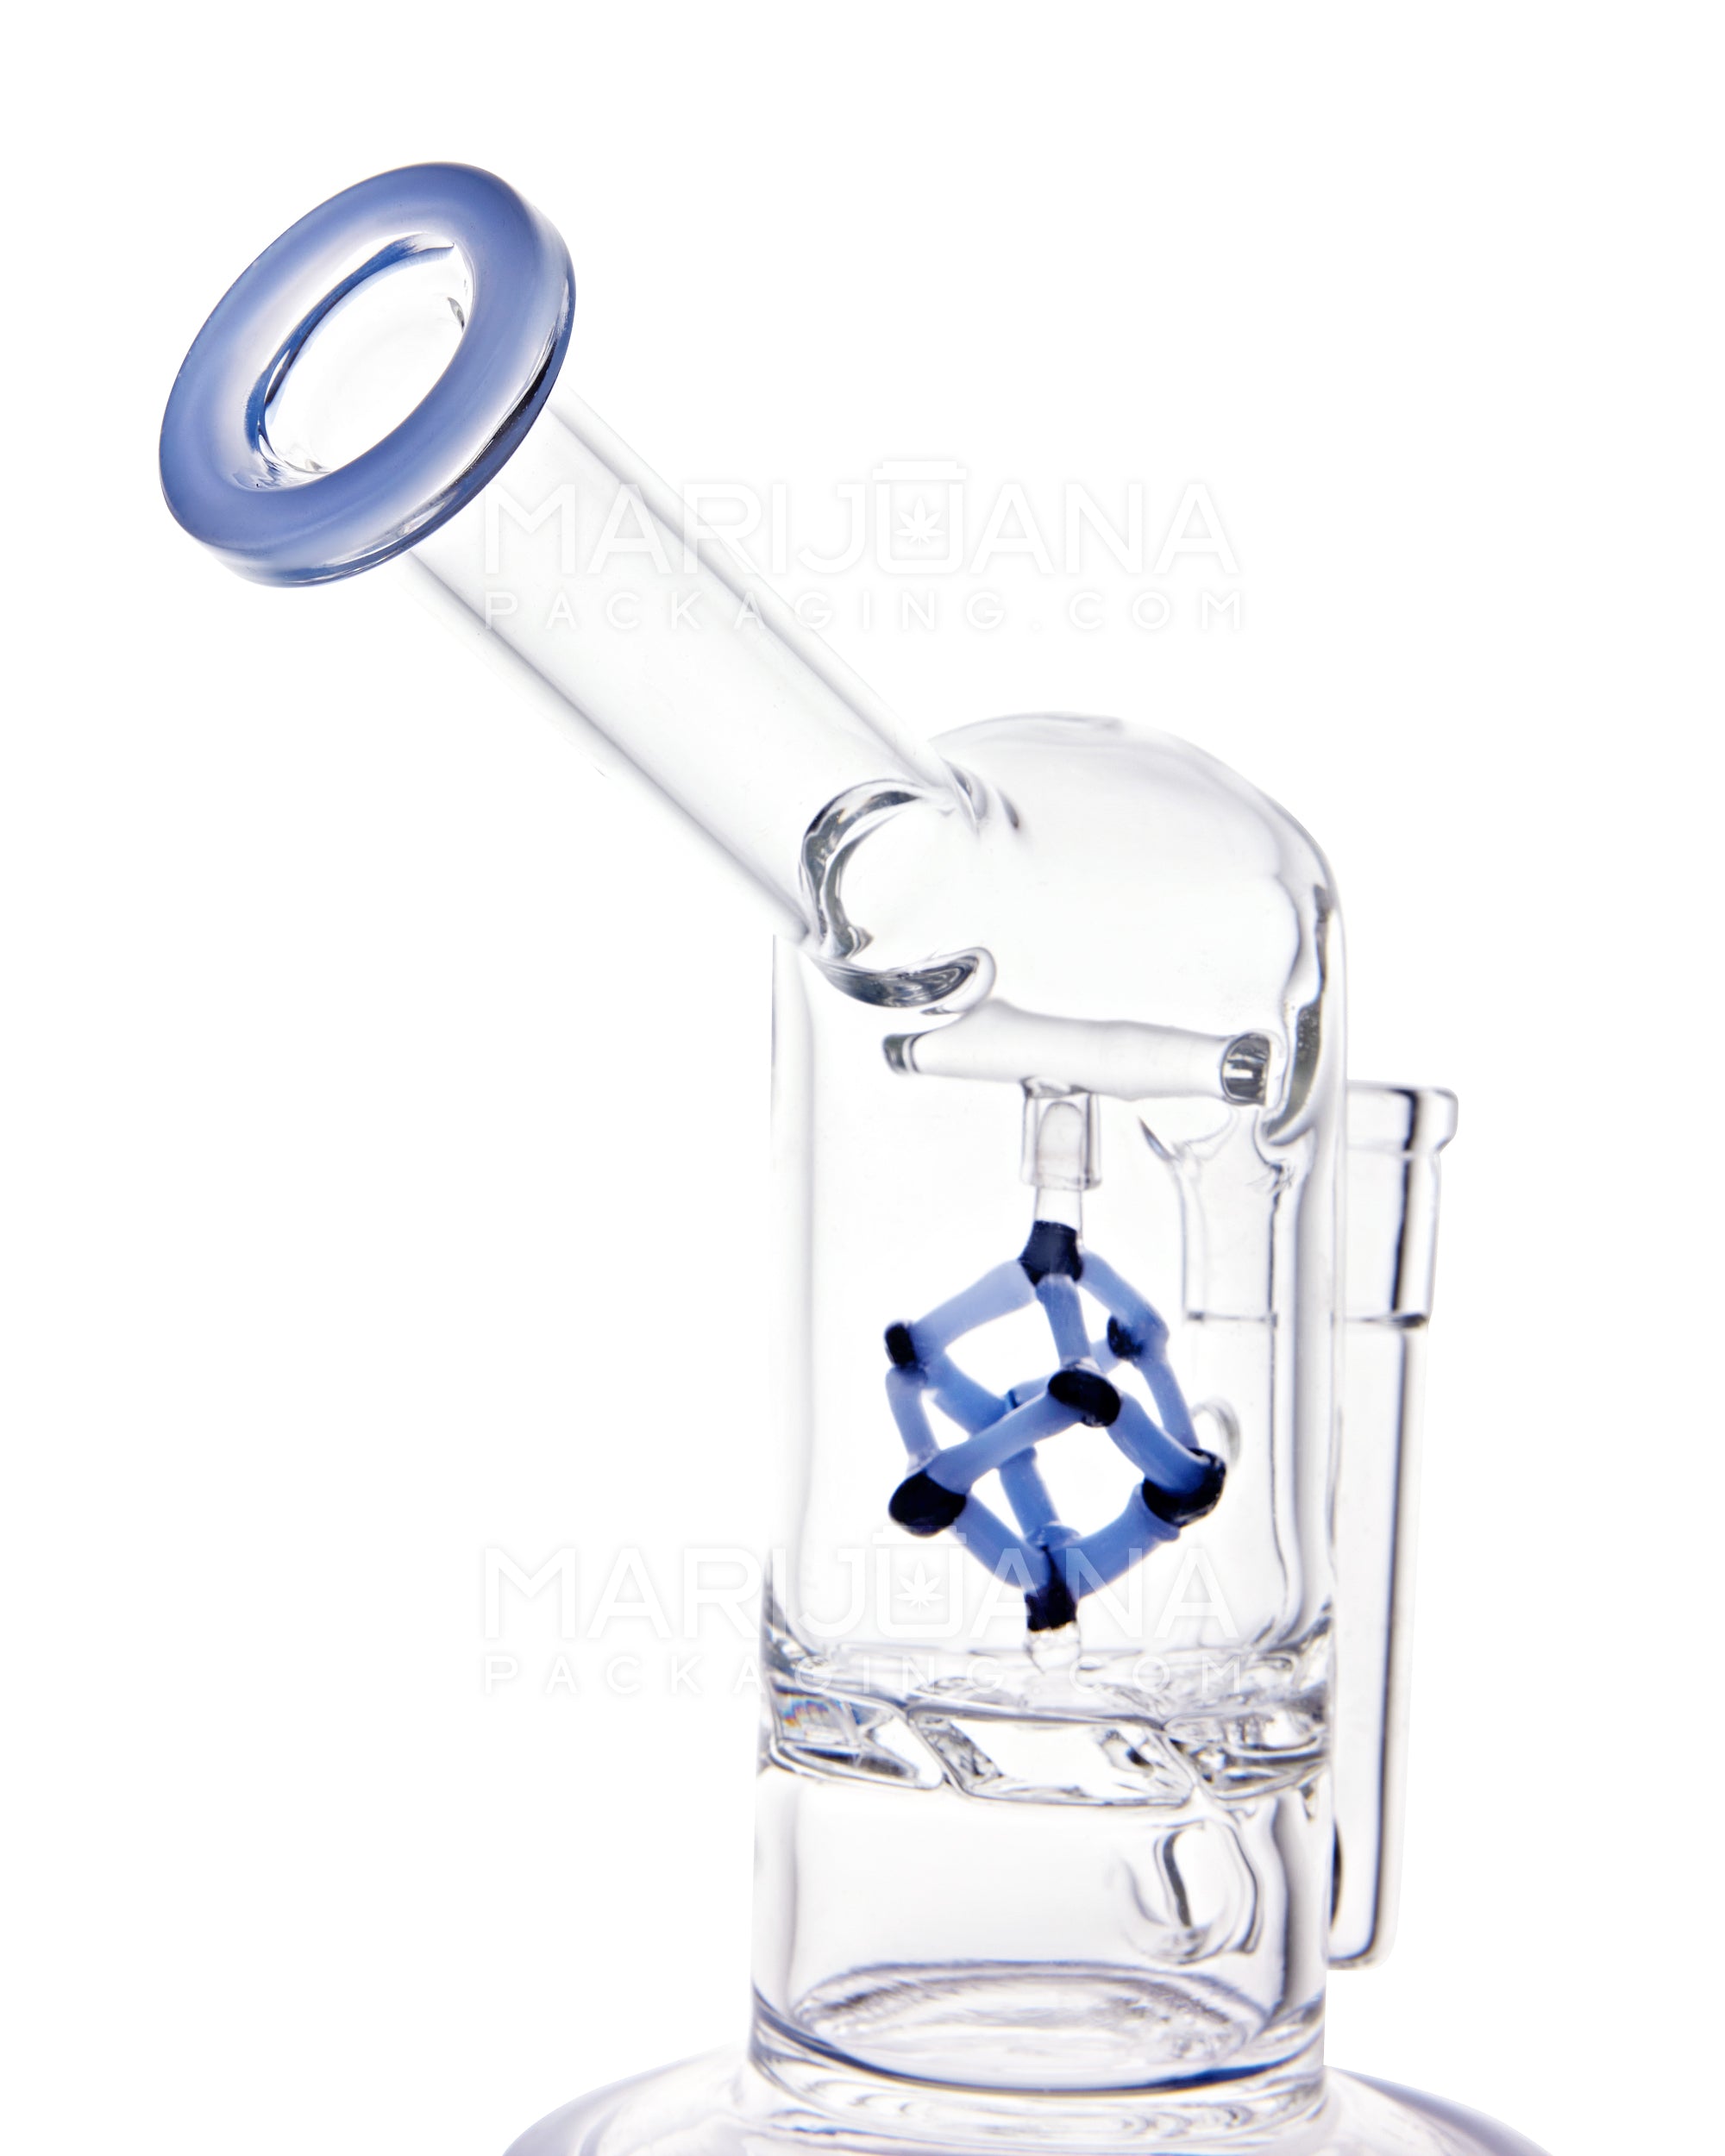 USA Glass | Vortex Perc Glass Water Pipe w/ Spinning Cube | 7in Tall - 14mm Bowl - Blue